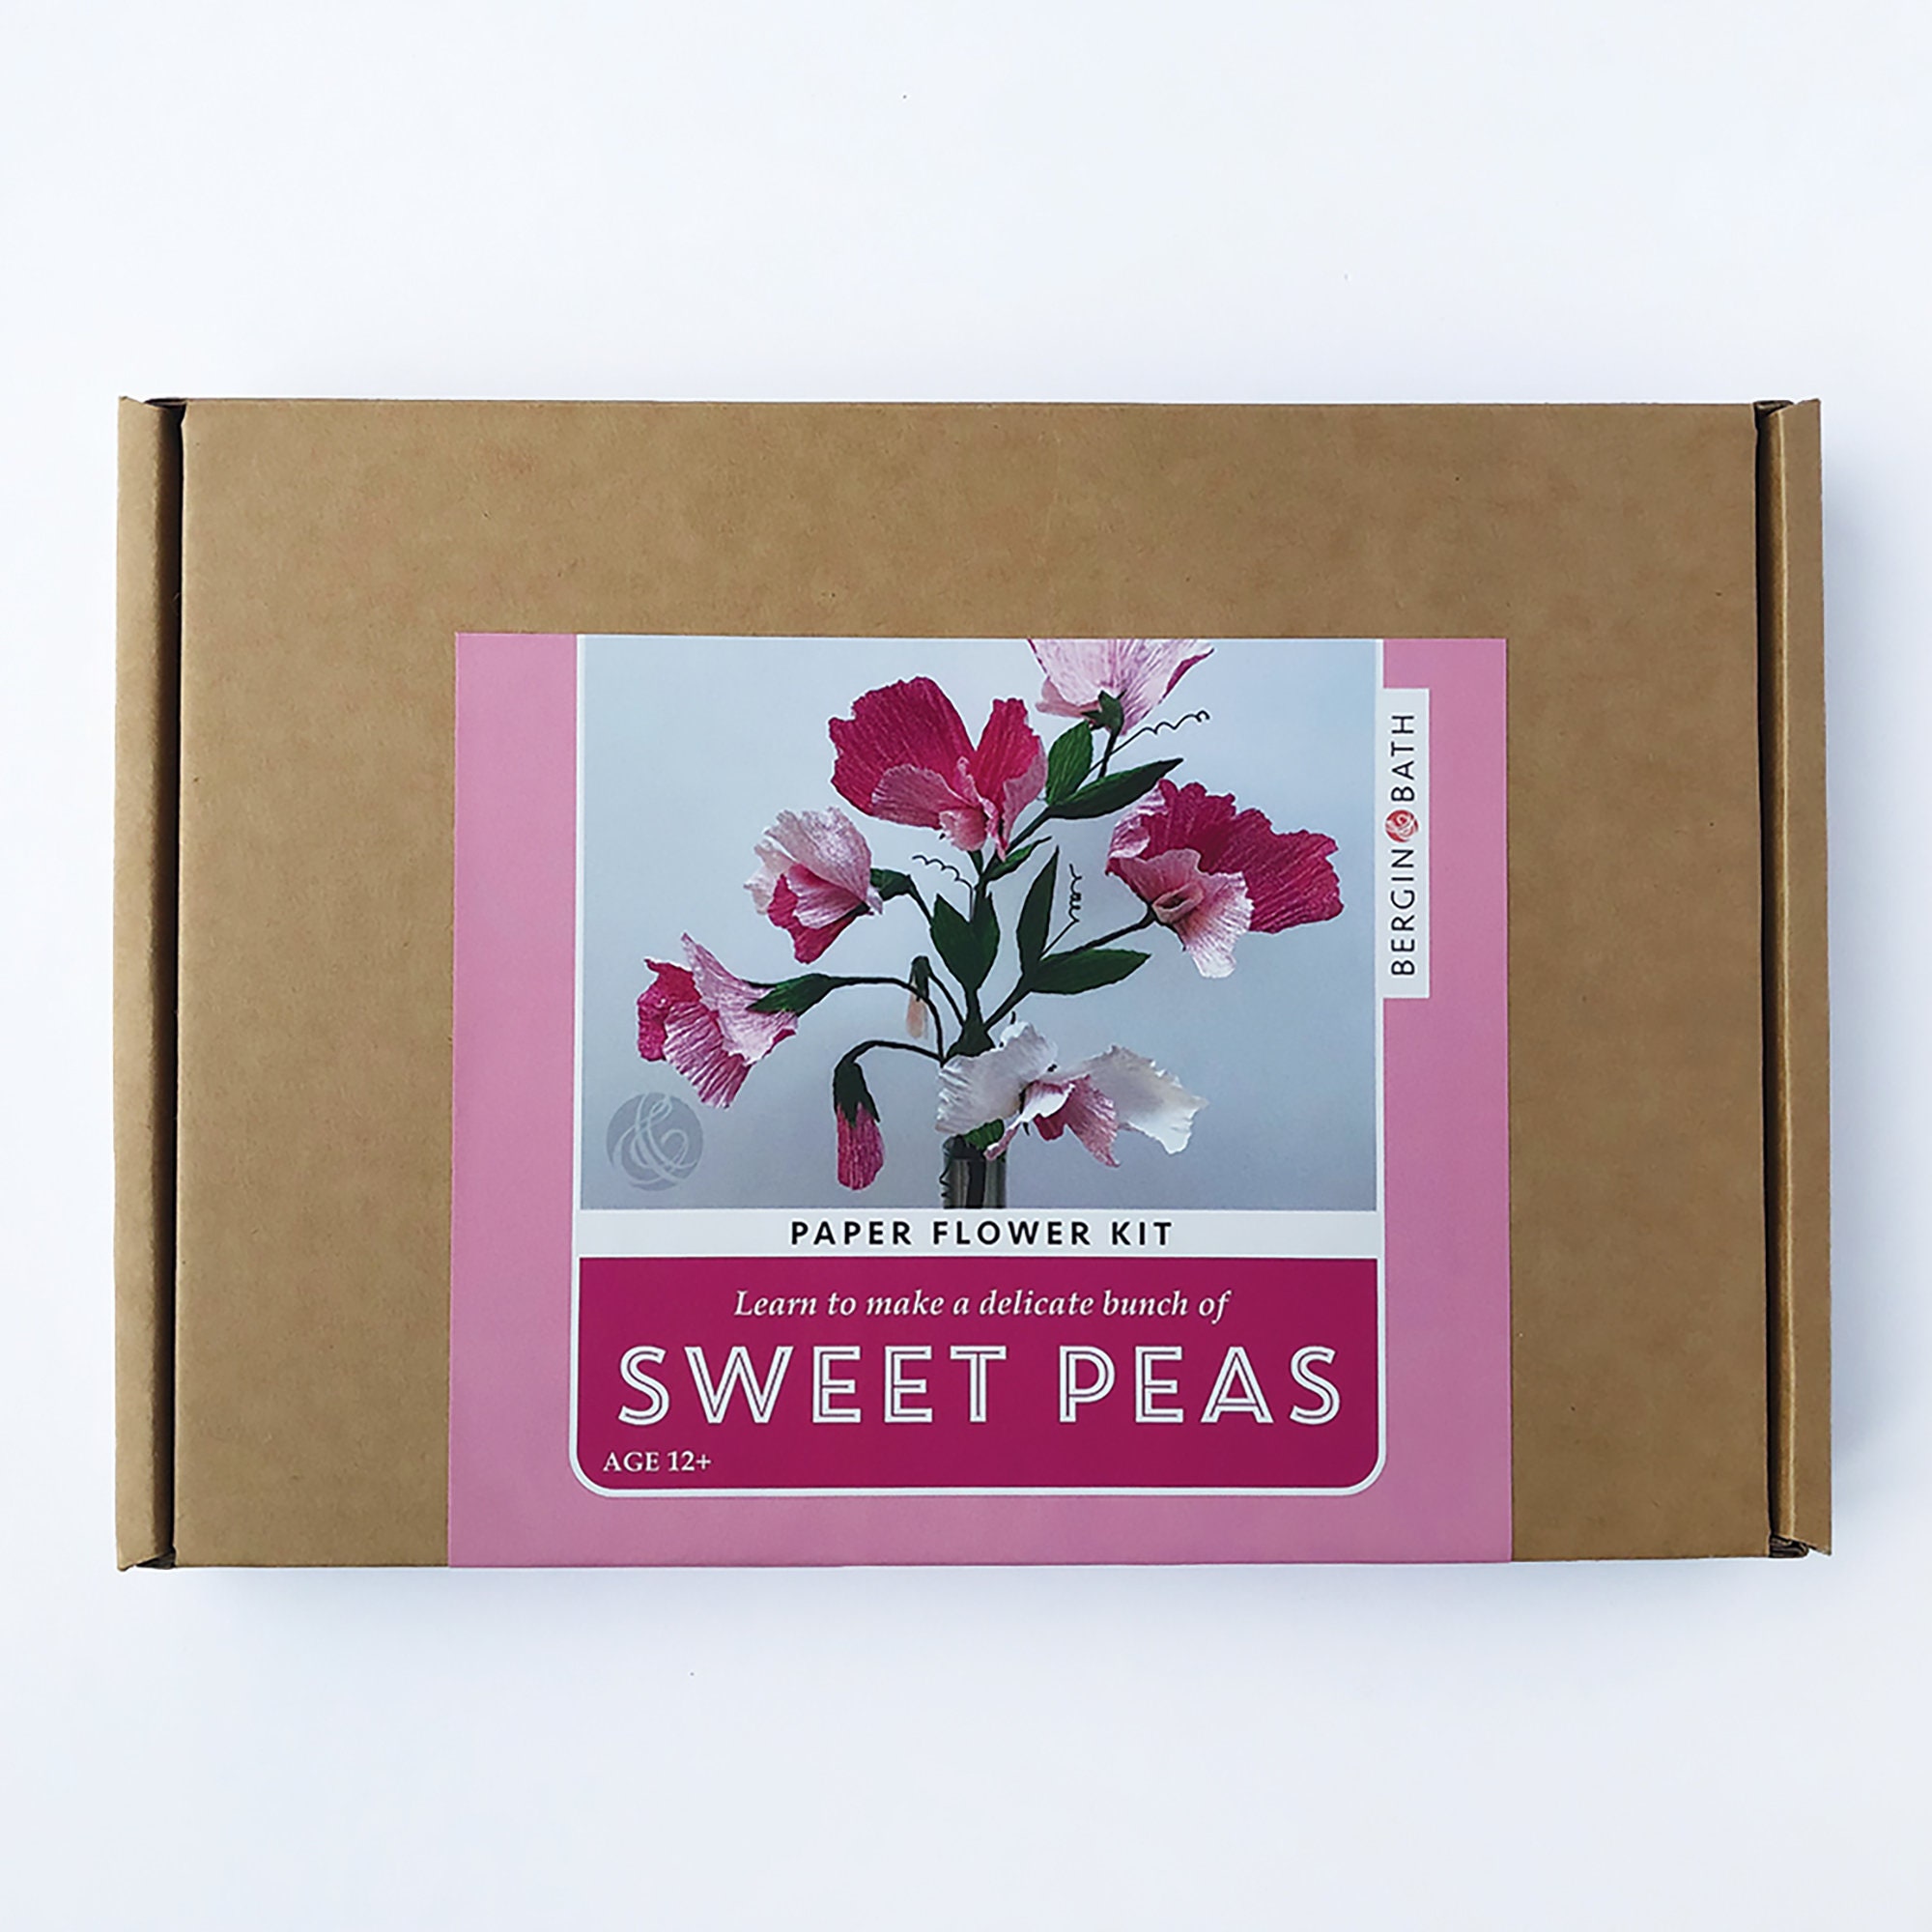 Paper Flower Kit Sweet Peas. A Creative Craft Kit Adults, Gift for Mum,  Sister or Girlfriend. Make Your Own Paper Sweet Pea Flowers. 